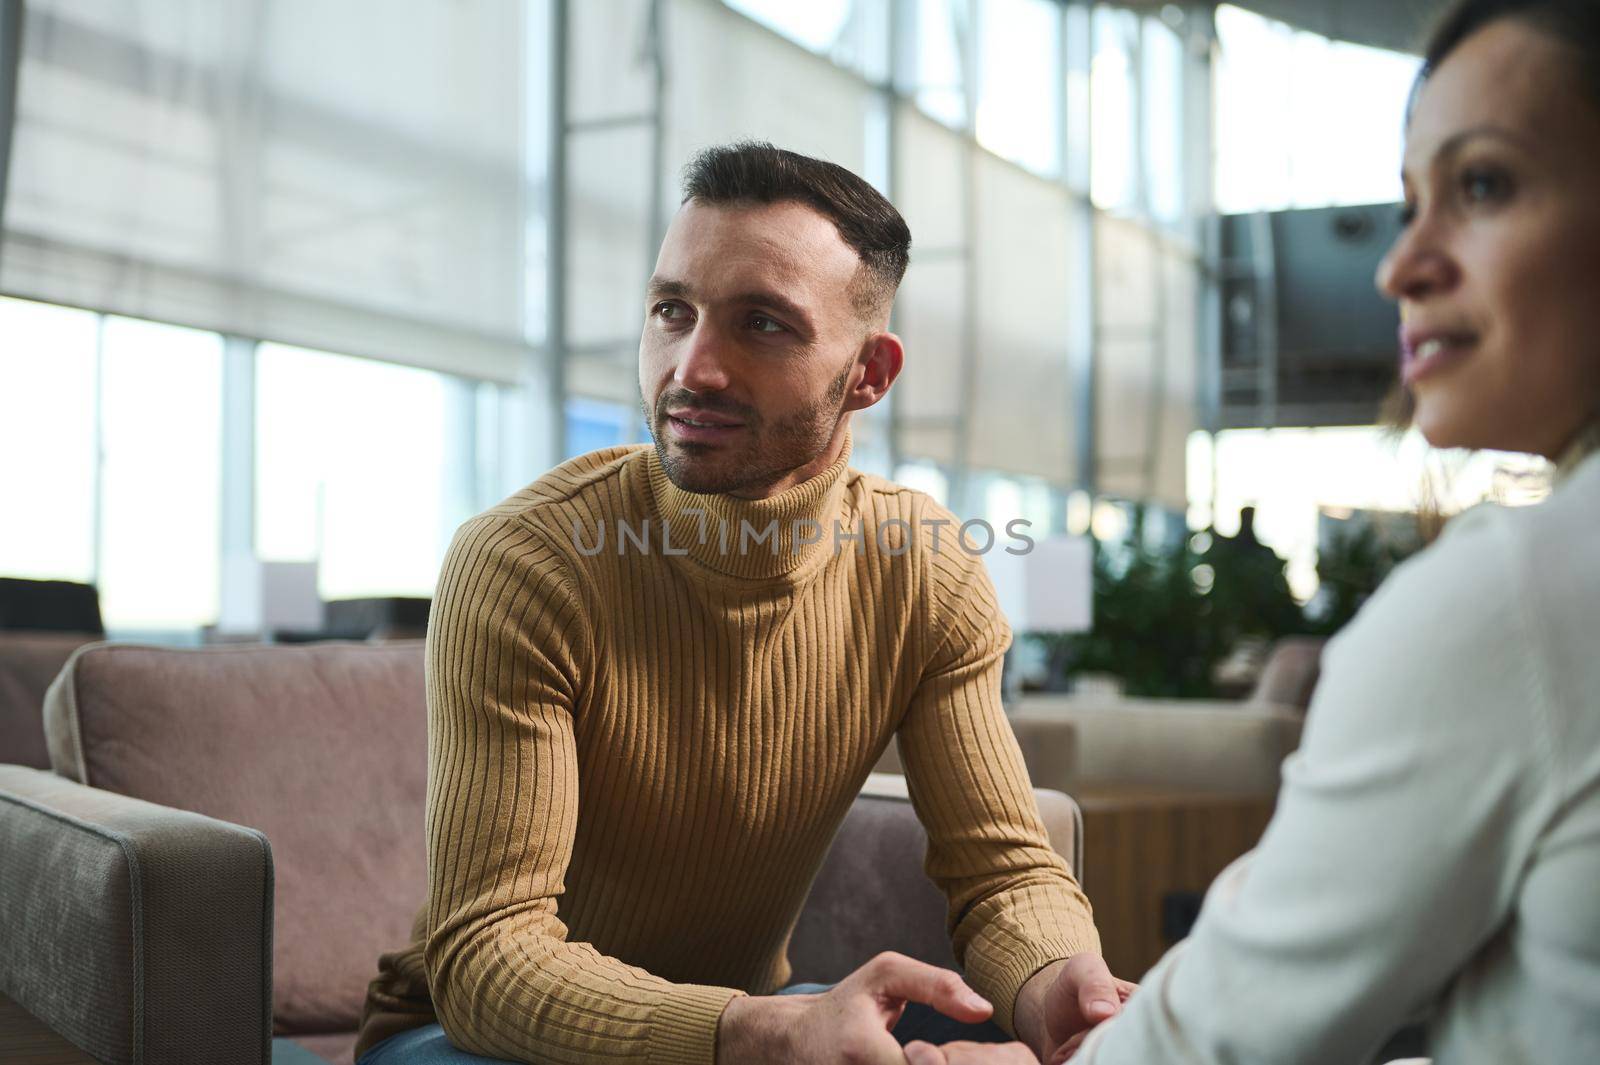 Handsome young Arabic man looking away, holding hands of his girlfriend, sitting together in chair in VIP lounge at airport against panoramic windows by artgf